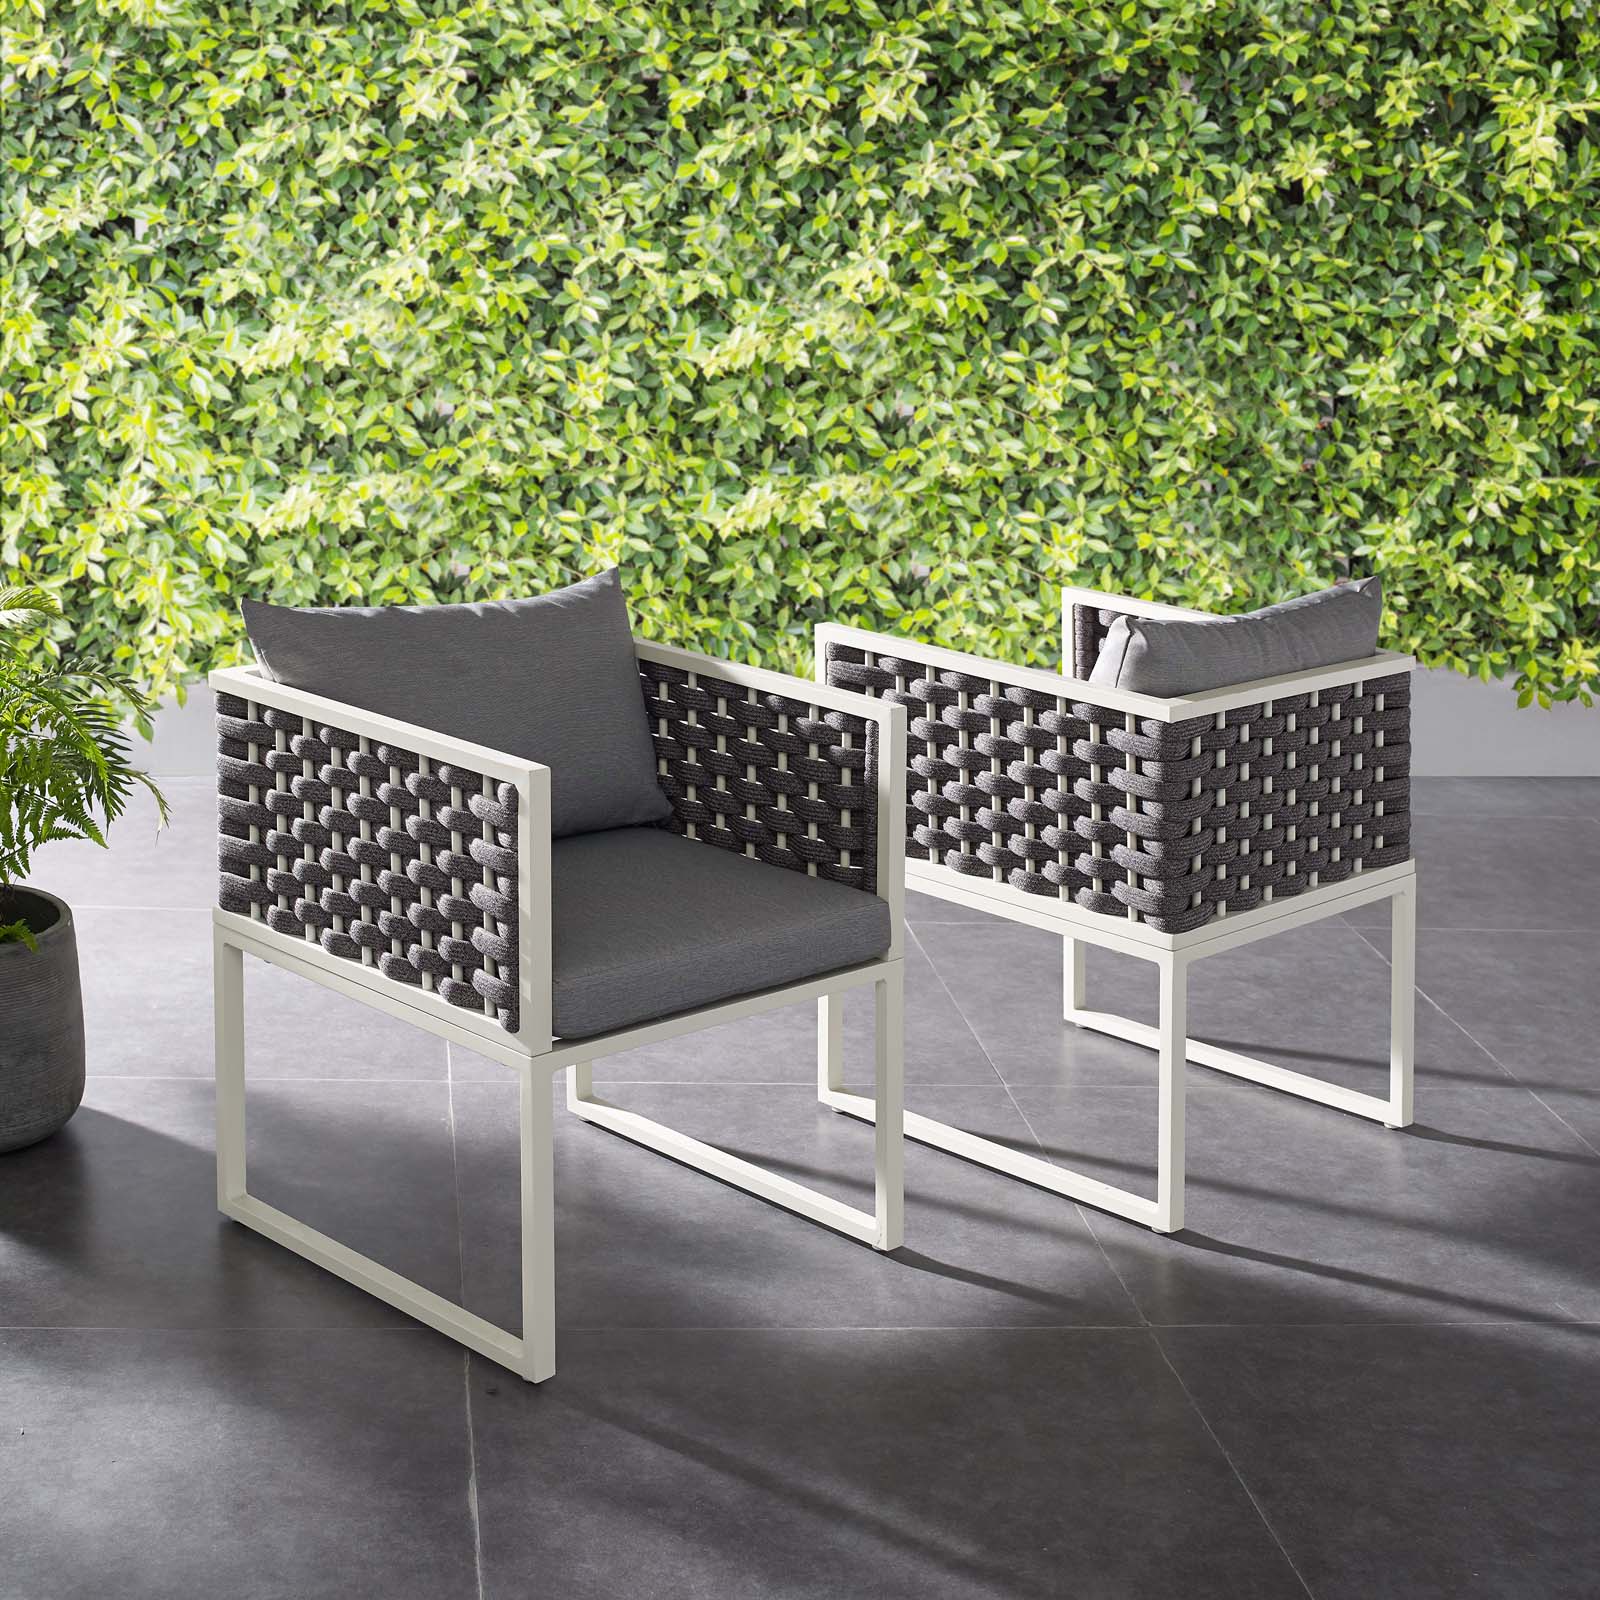 Modern Contemporary Urban Outdoor Patio Balcony Garden Furniture Side Dining Chair Armchair, Set of Two, Fabric Aluminium, White Grey Gray - image 2 of 6